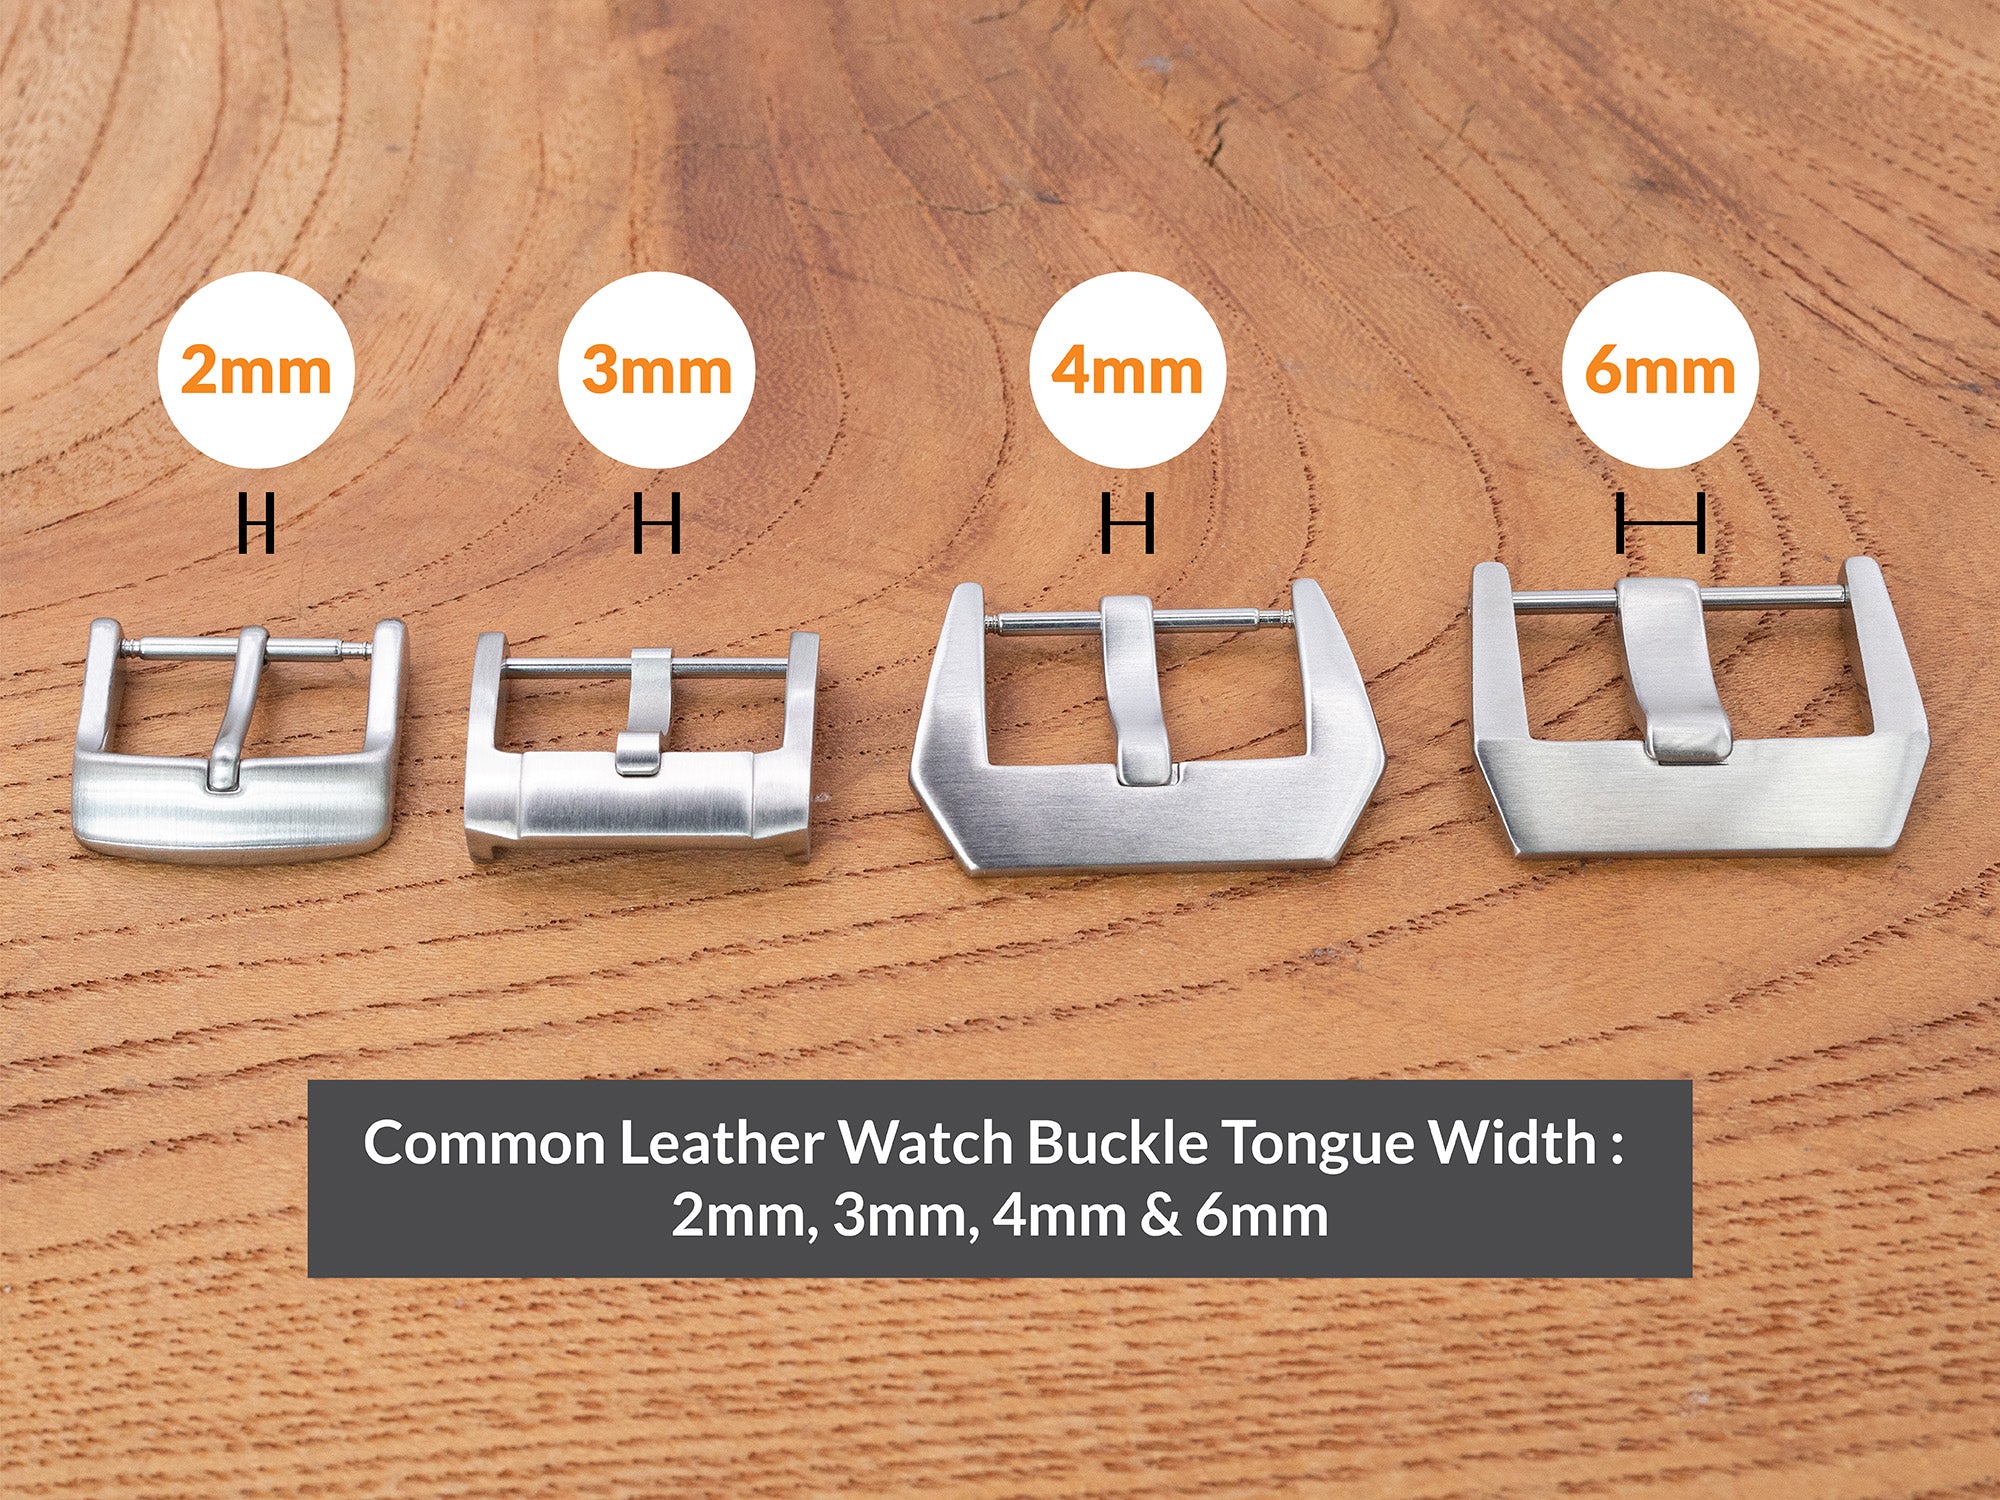 types of watch bands, watch band parts, watch band terms by strapcode-watch-bands -Terminology-B-04